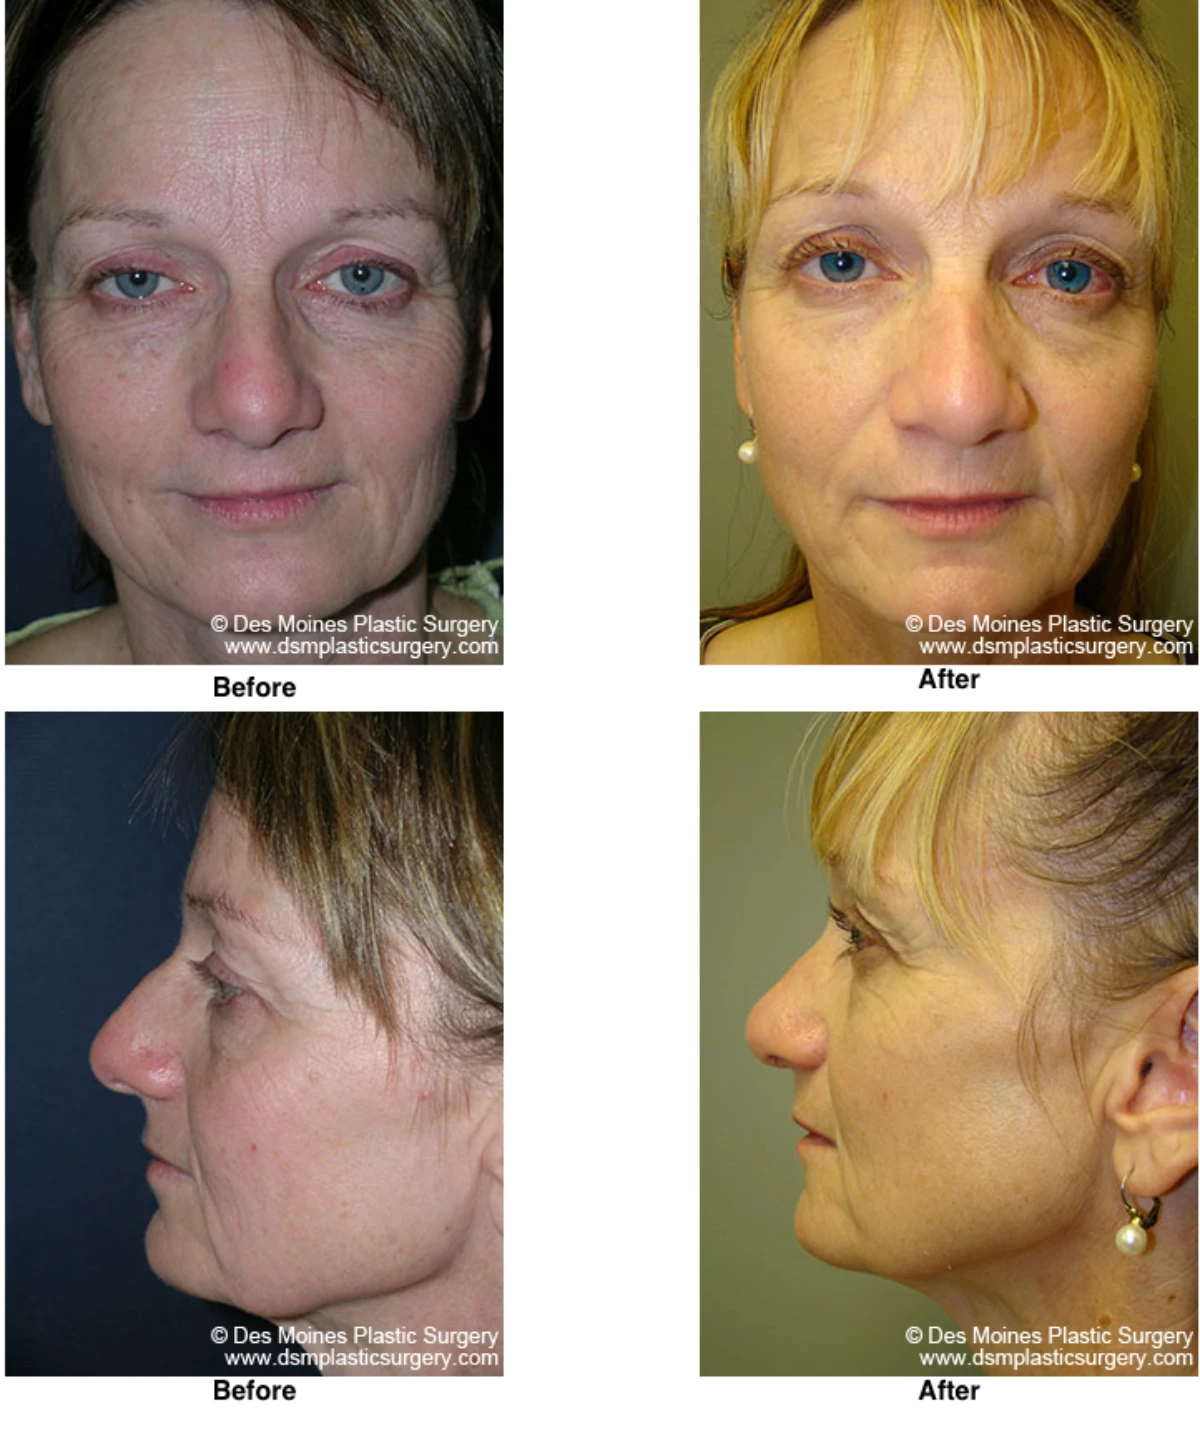 Rhinoplasty Before and After Performed by Dr David Robbins